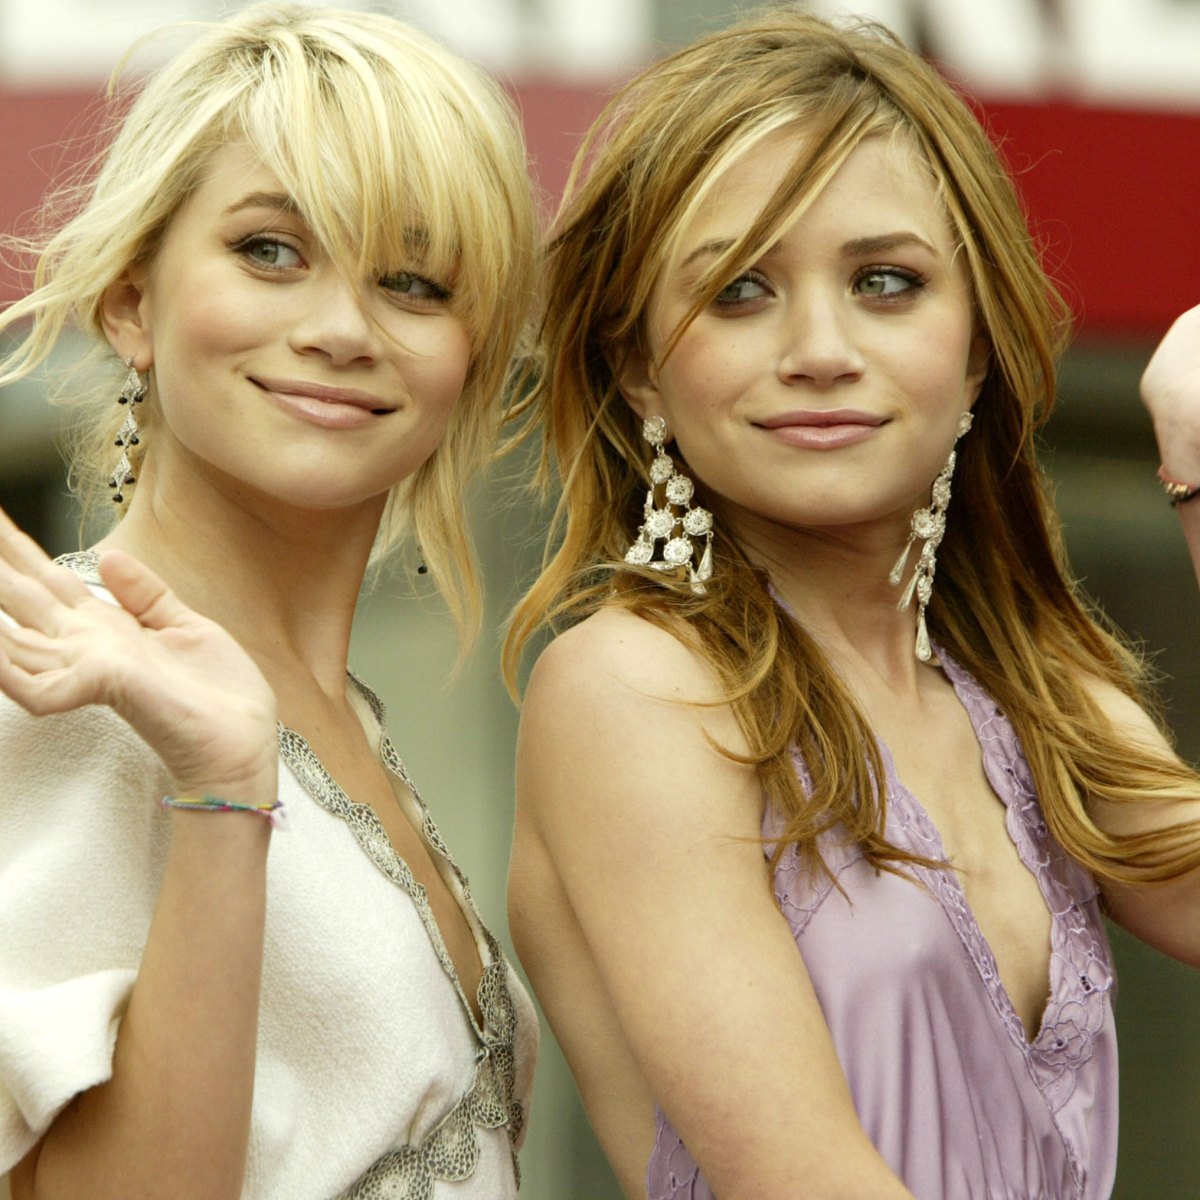 Mary-Kate and Ashley New York Minute: How It Hurt Their Career